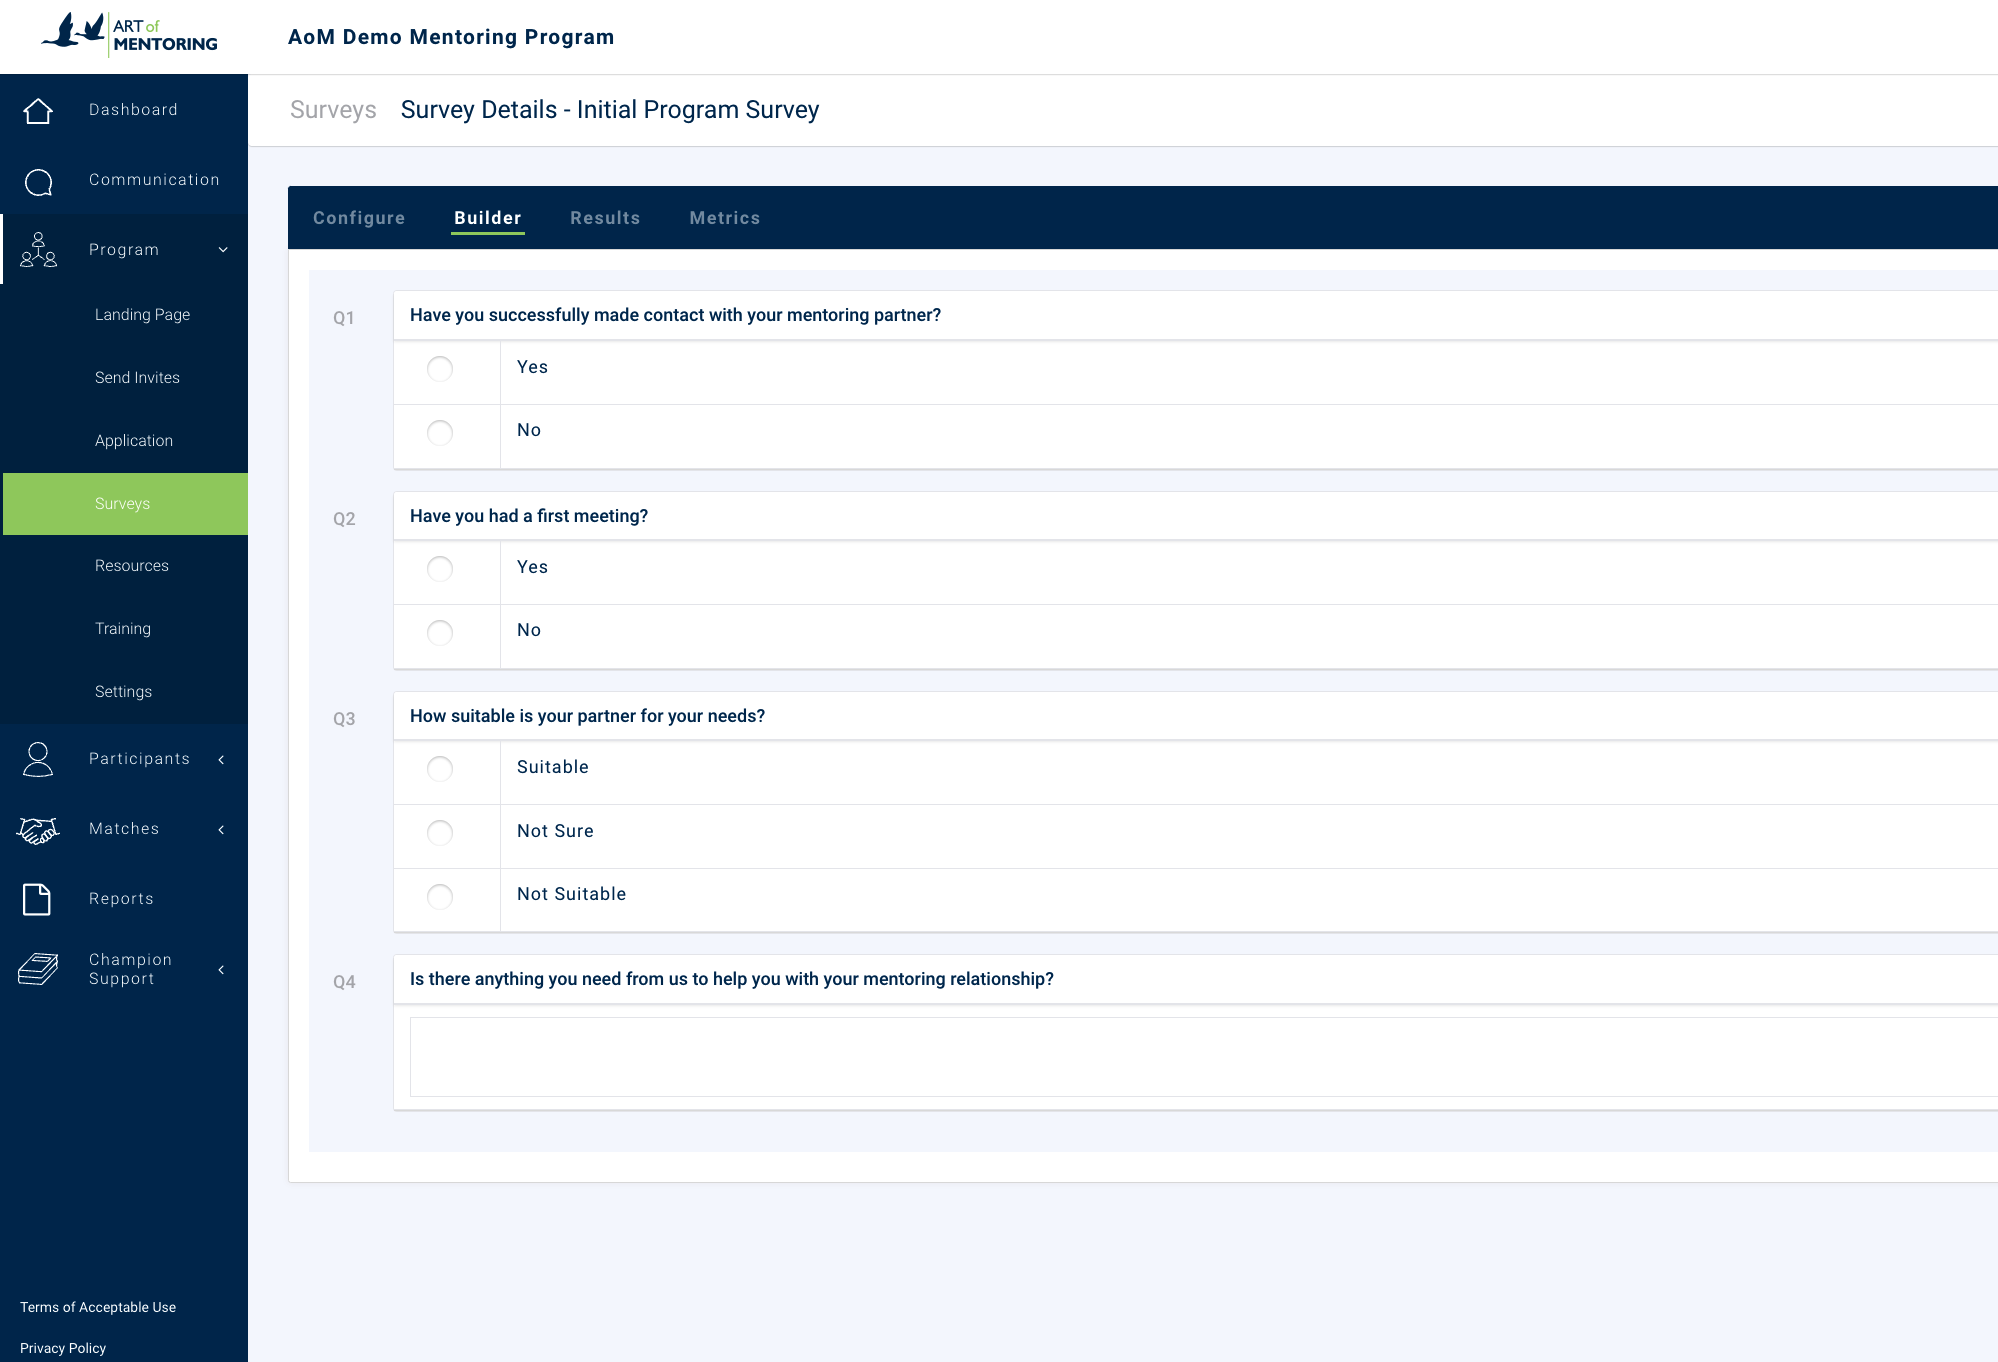 Survey Builder to track progress and increase engagement.